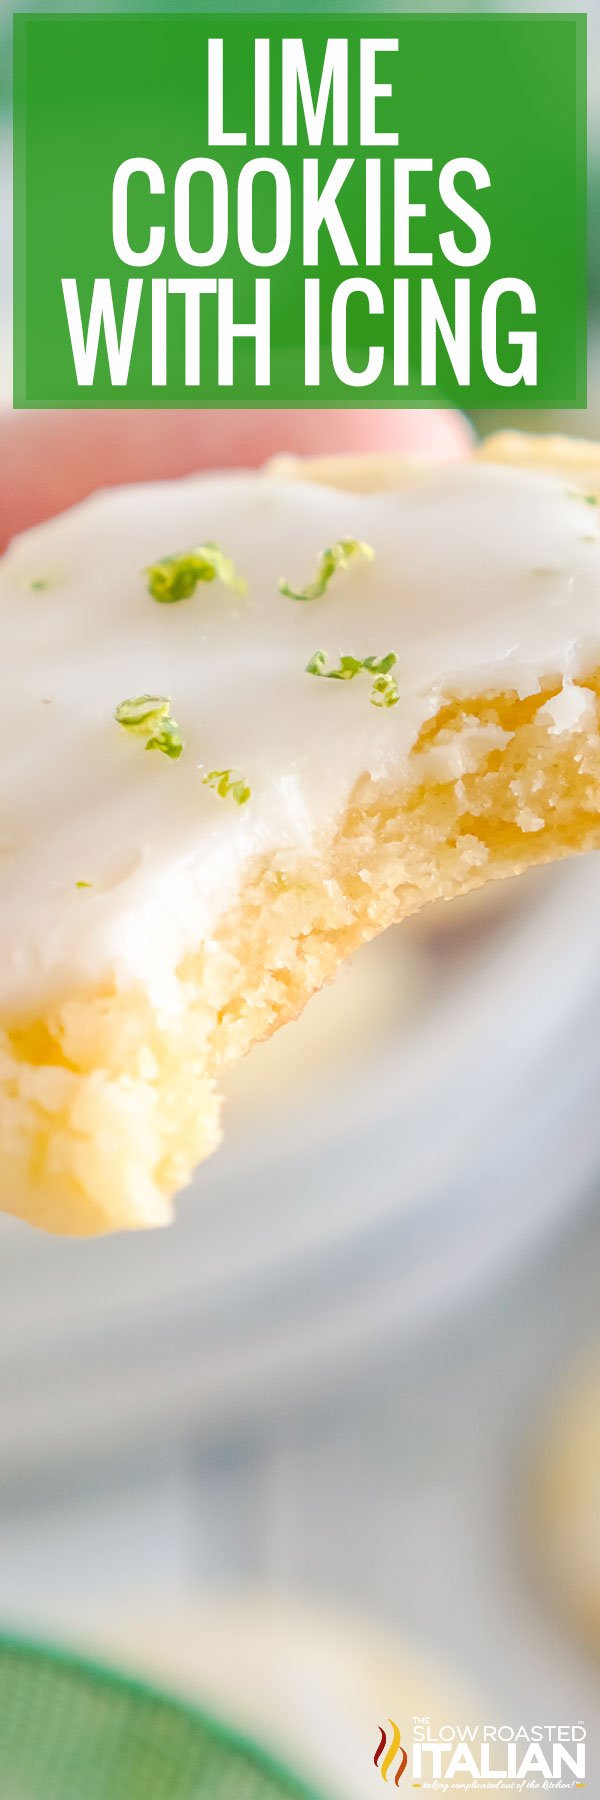 lime cookies with icing -pin